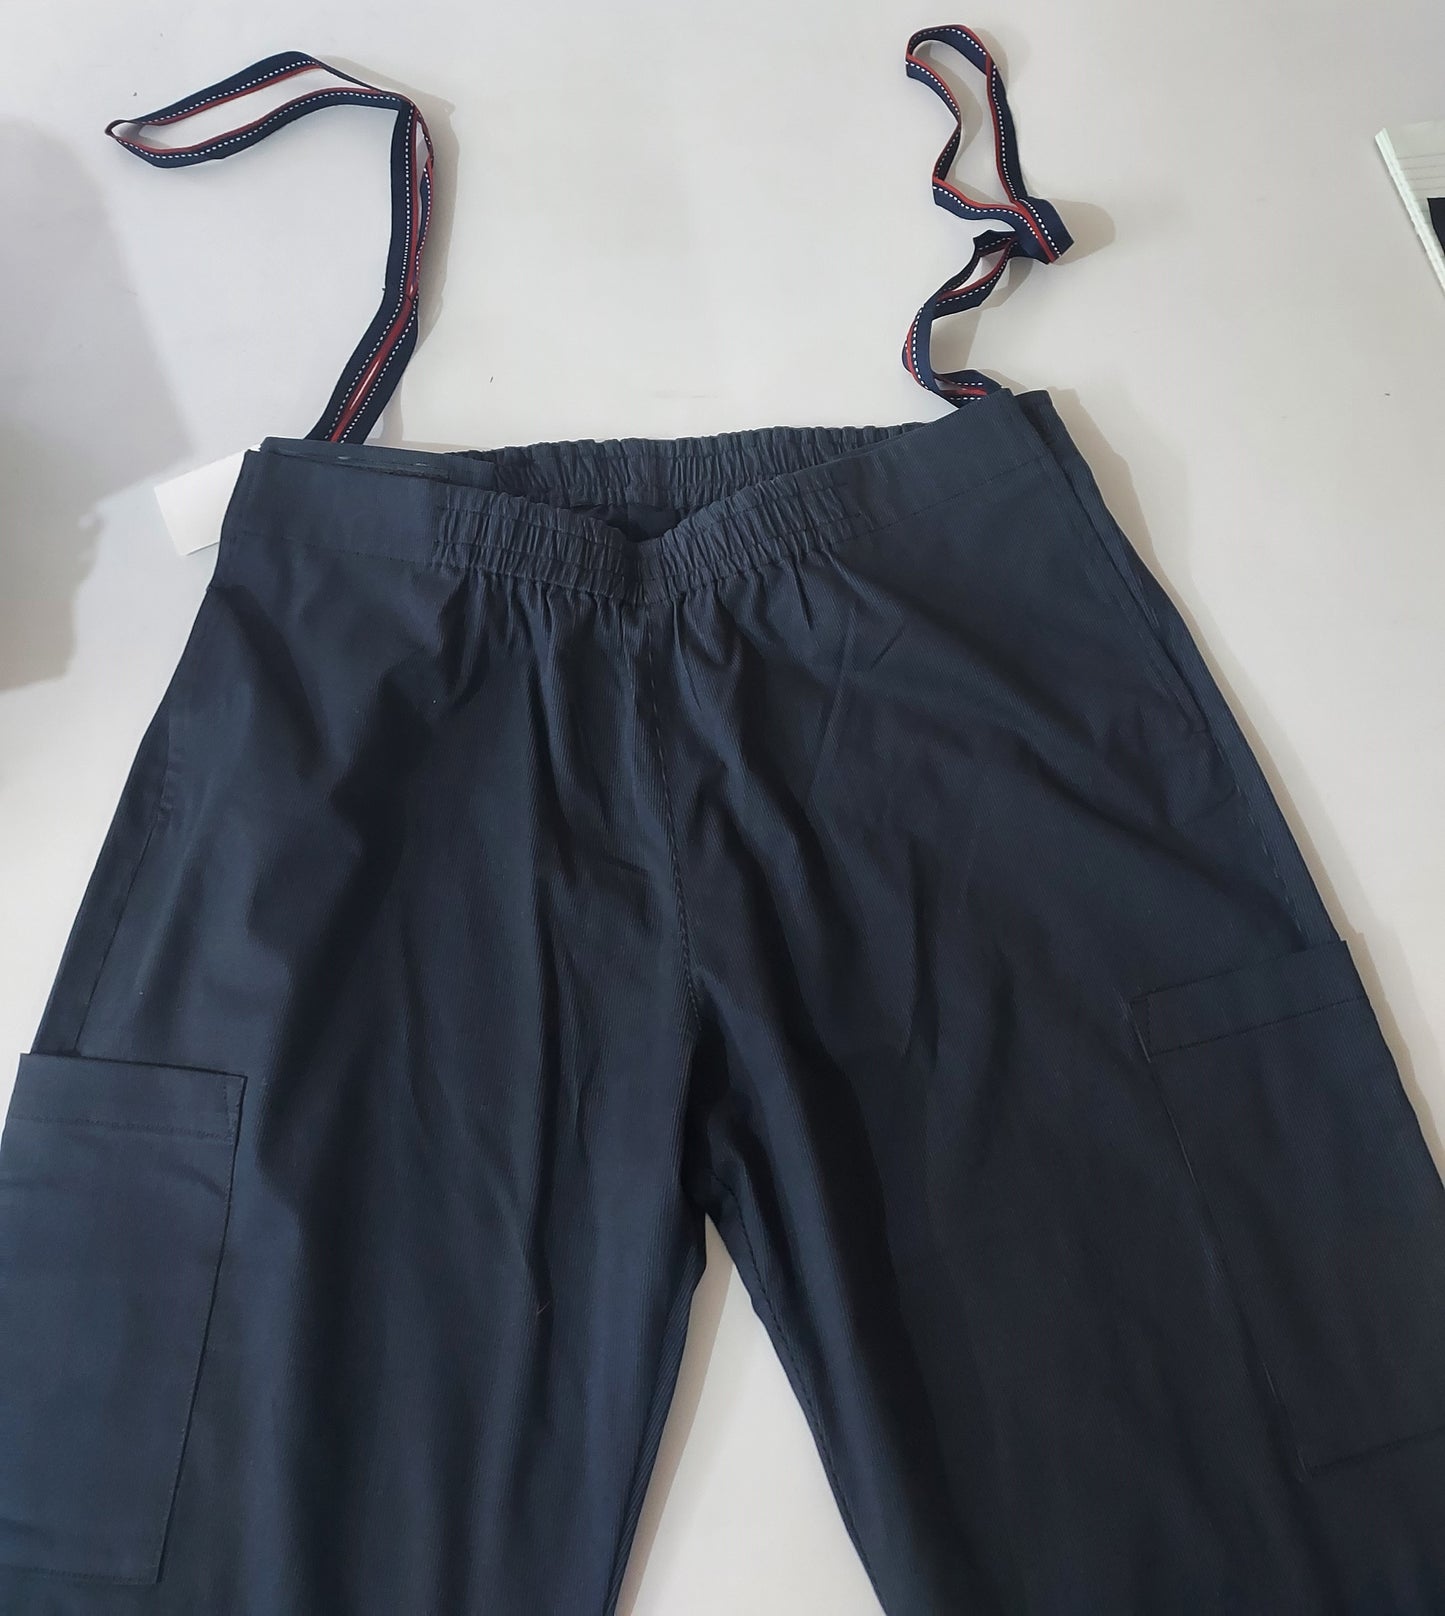 In this photo, the trouser is laid flat on a white surface. one can see two patch pockets on the thigh area on both the sides. elastic on the back and front. there are two loops to help the wearer pull up the trousers and also the caregiver can use the same to help the wearer. 